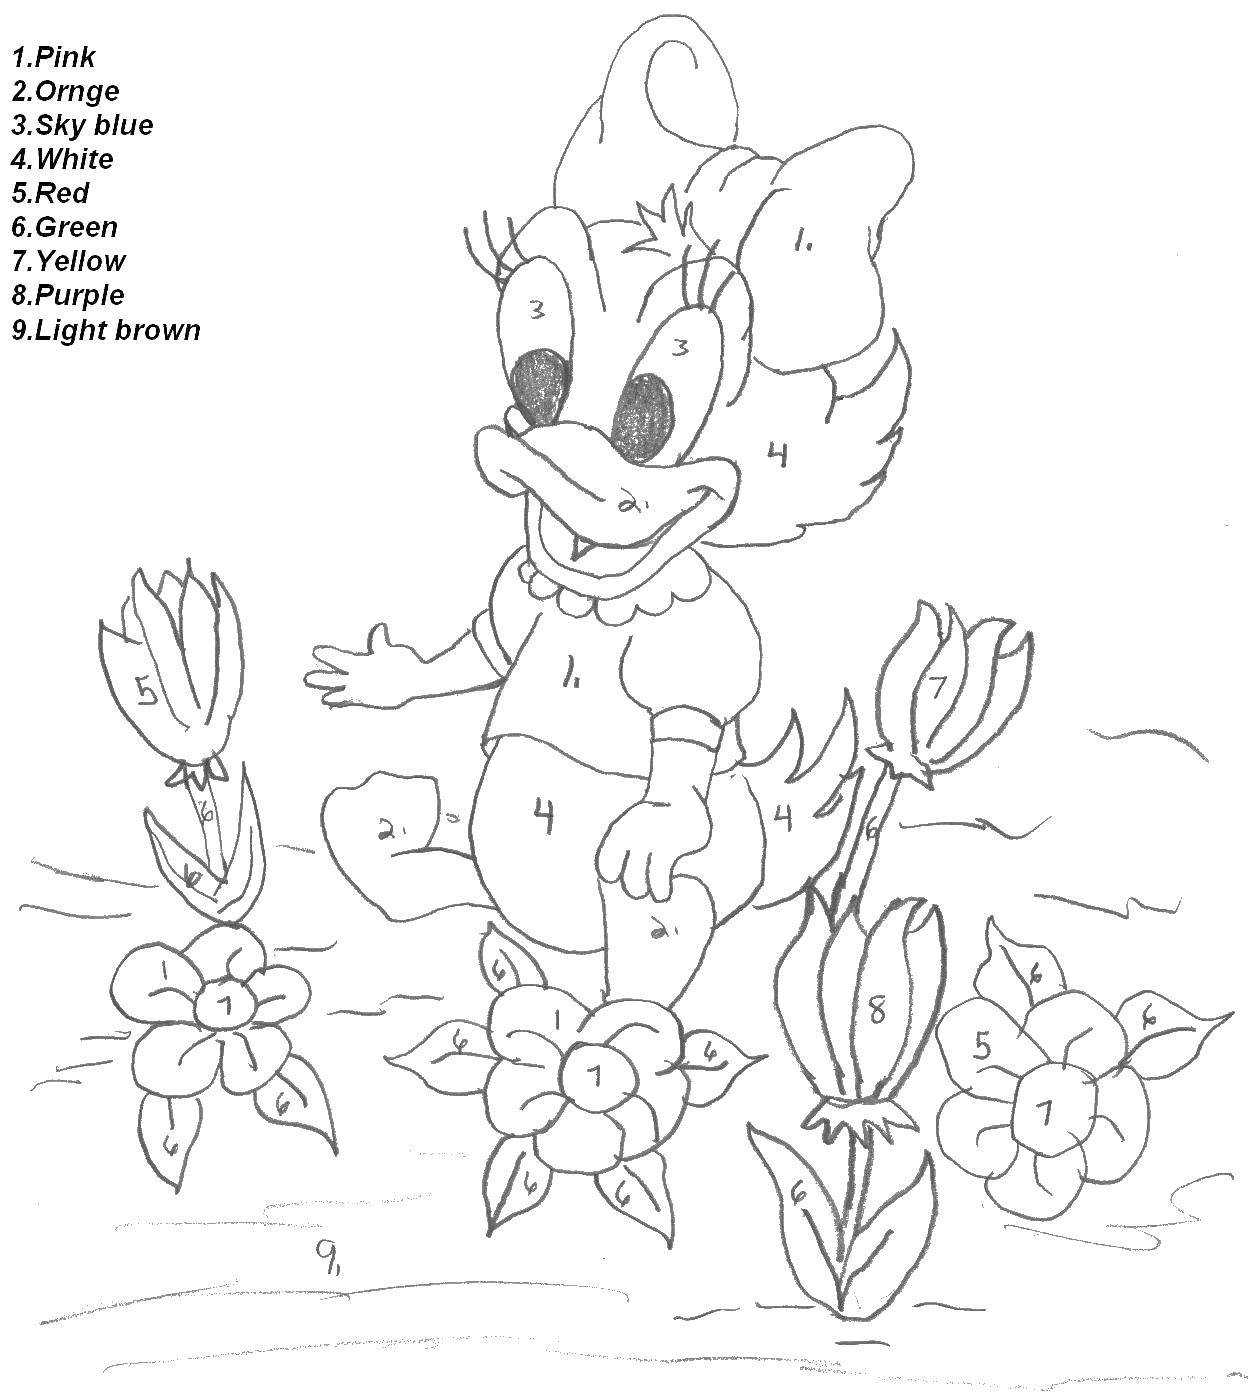 Coloring Daisy duck in childhood. Category coloring by numbers. Tags:  Daisy, paint-by-number.